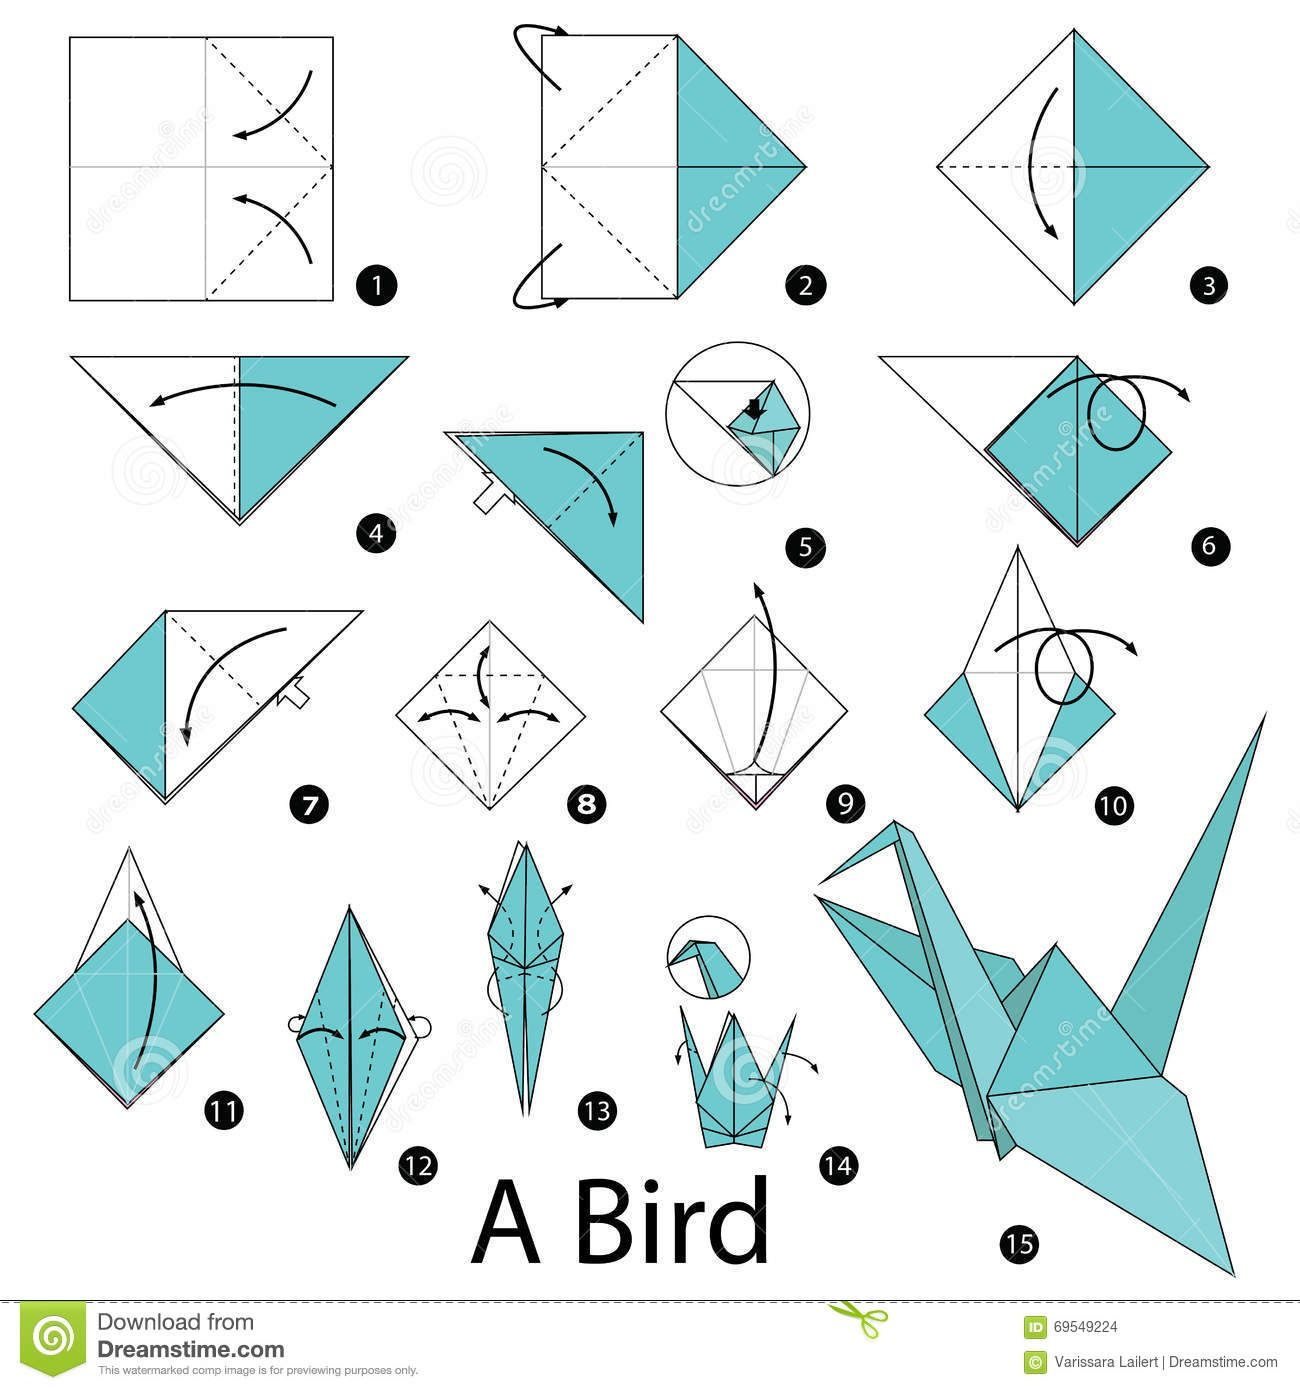 Origami Ideas Step By Step Image Result For Origami Instructions Sweet 16 Pinterest